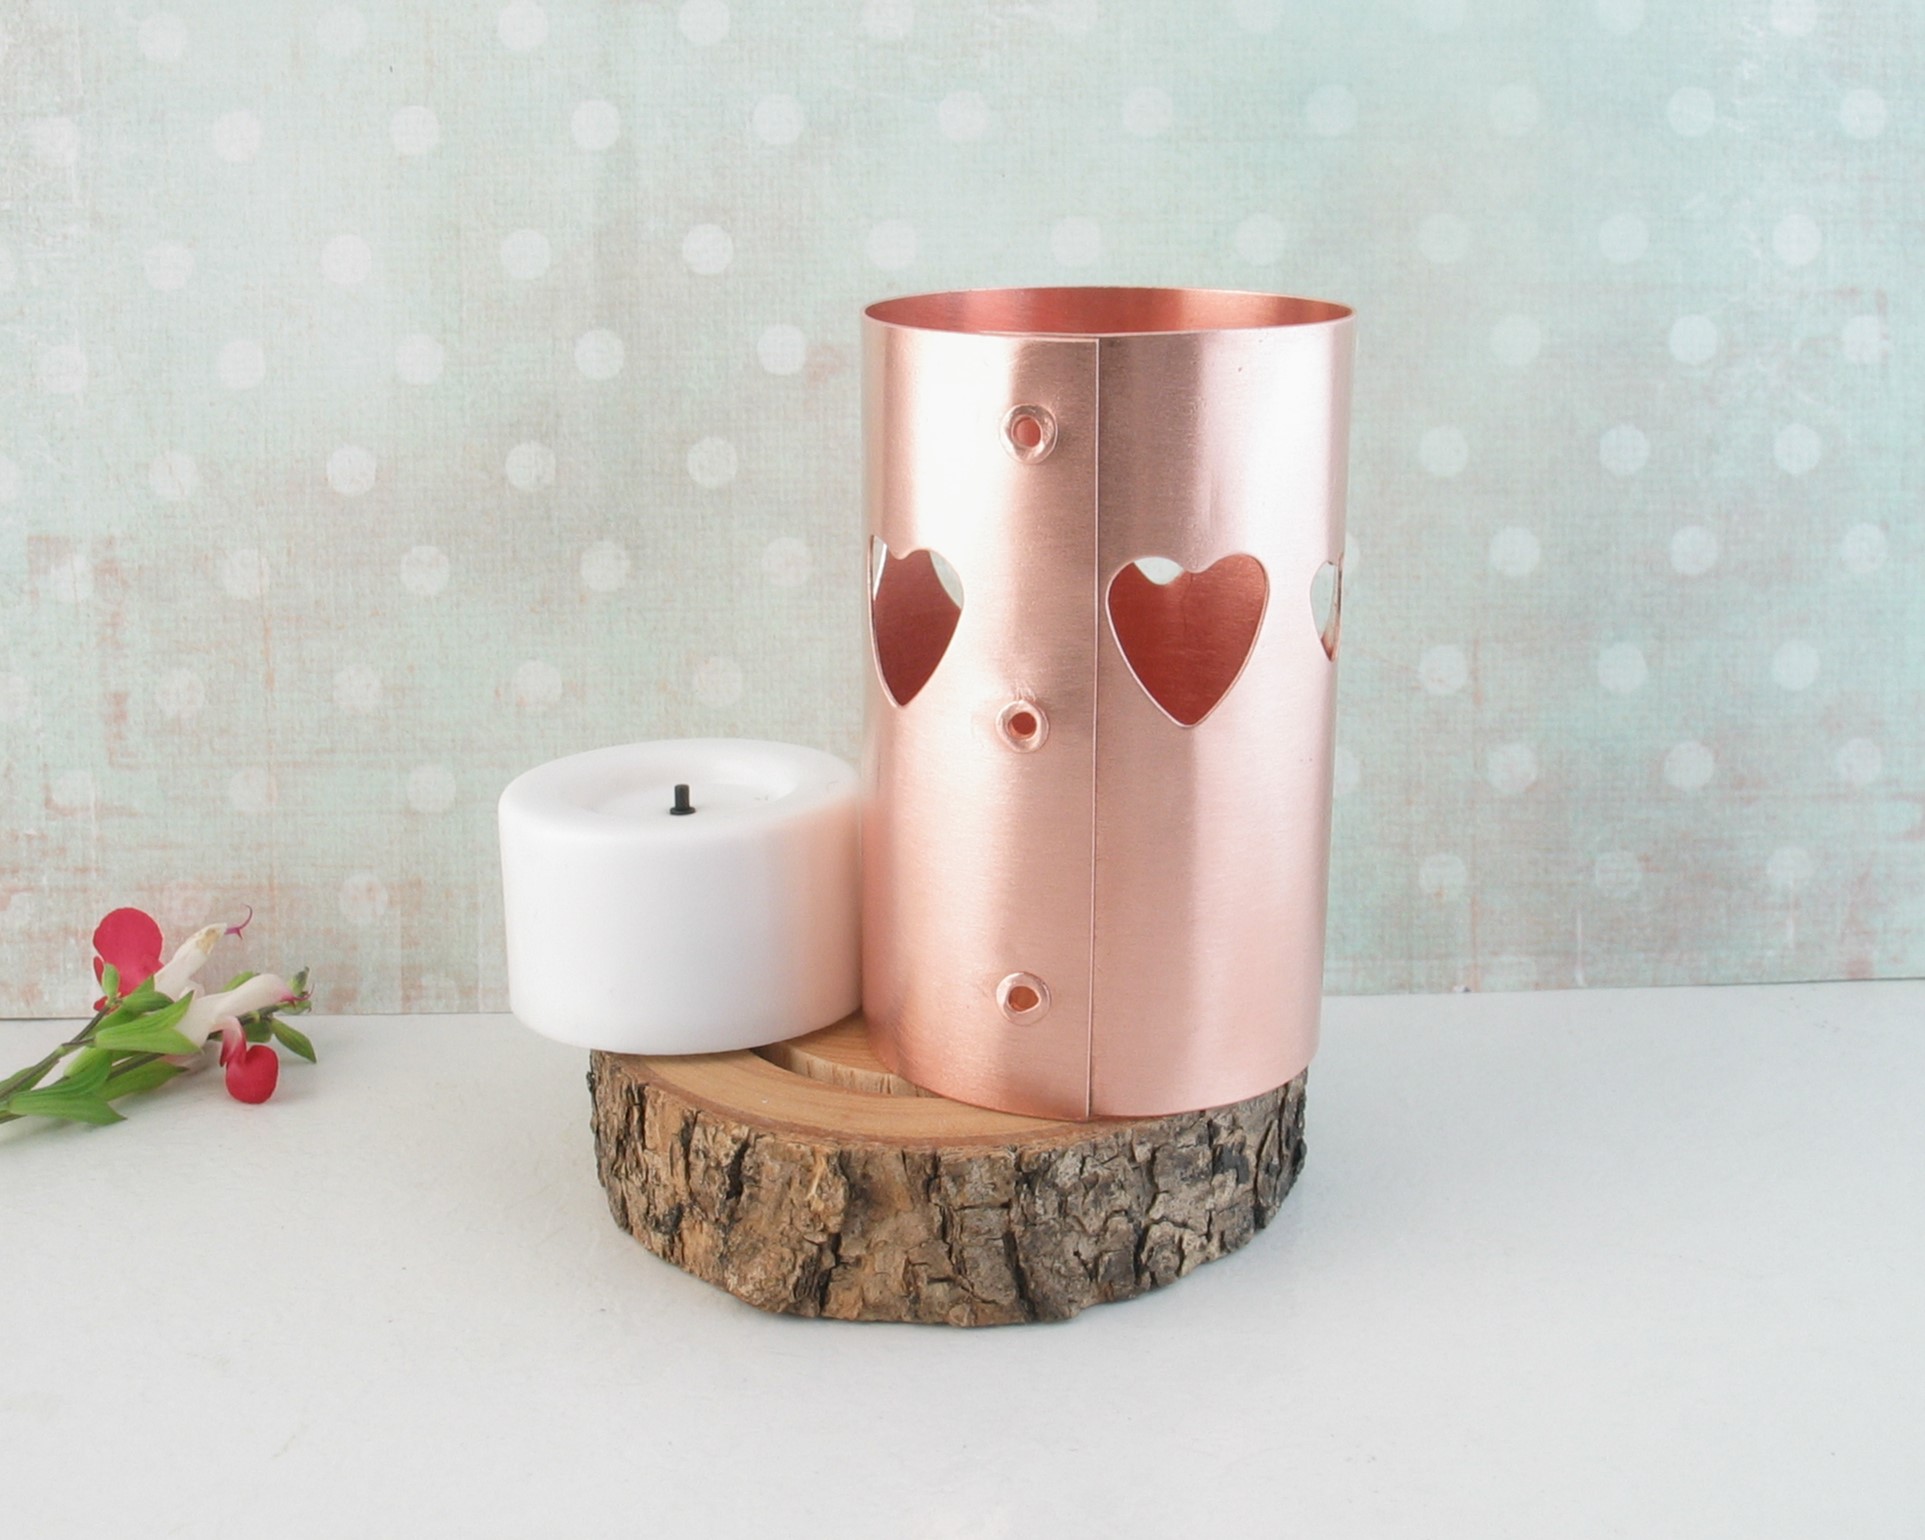 Scandanavian style heart-pierced copper chimney tea light candle holder on live-edge wooden base cut from tree limb. comes with flameless tealight candle.